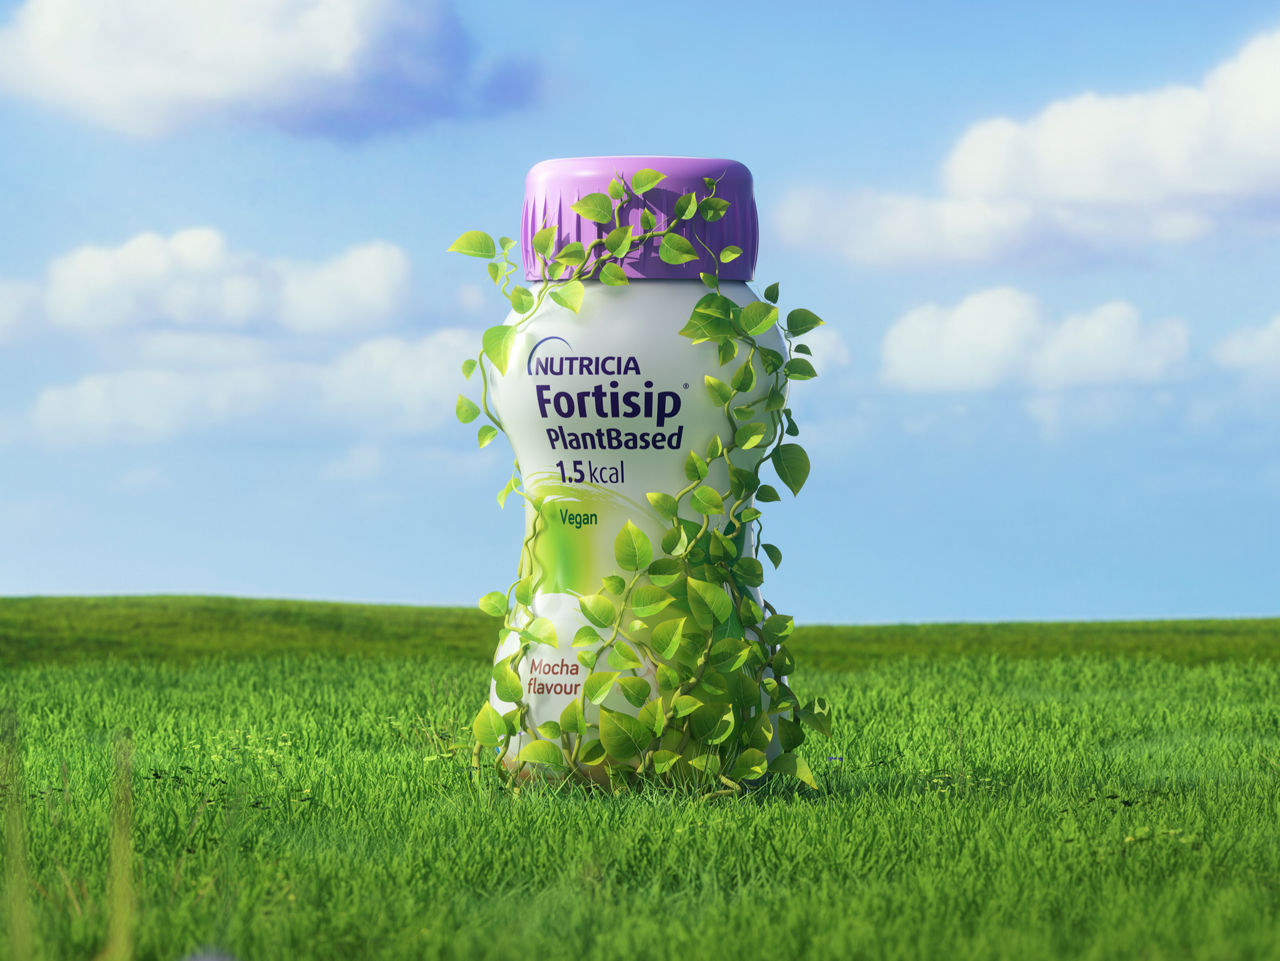 Introducing New Fortisip Plantbased